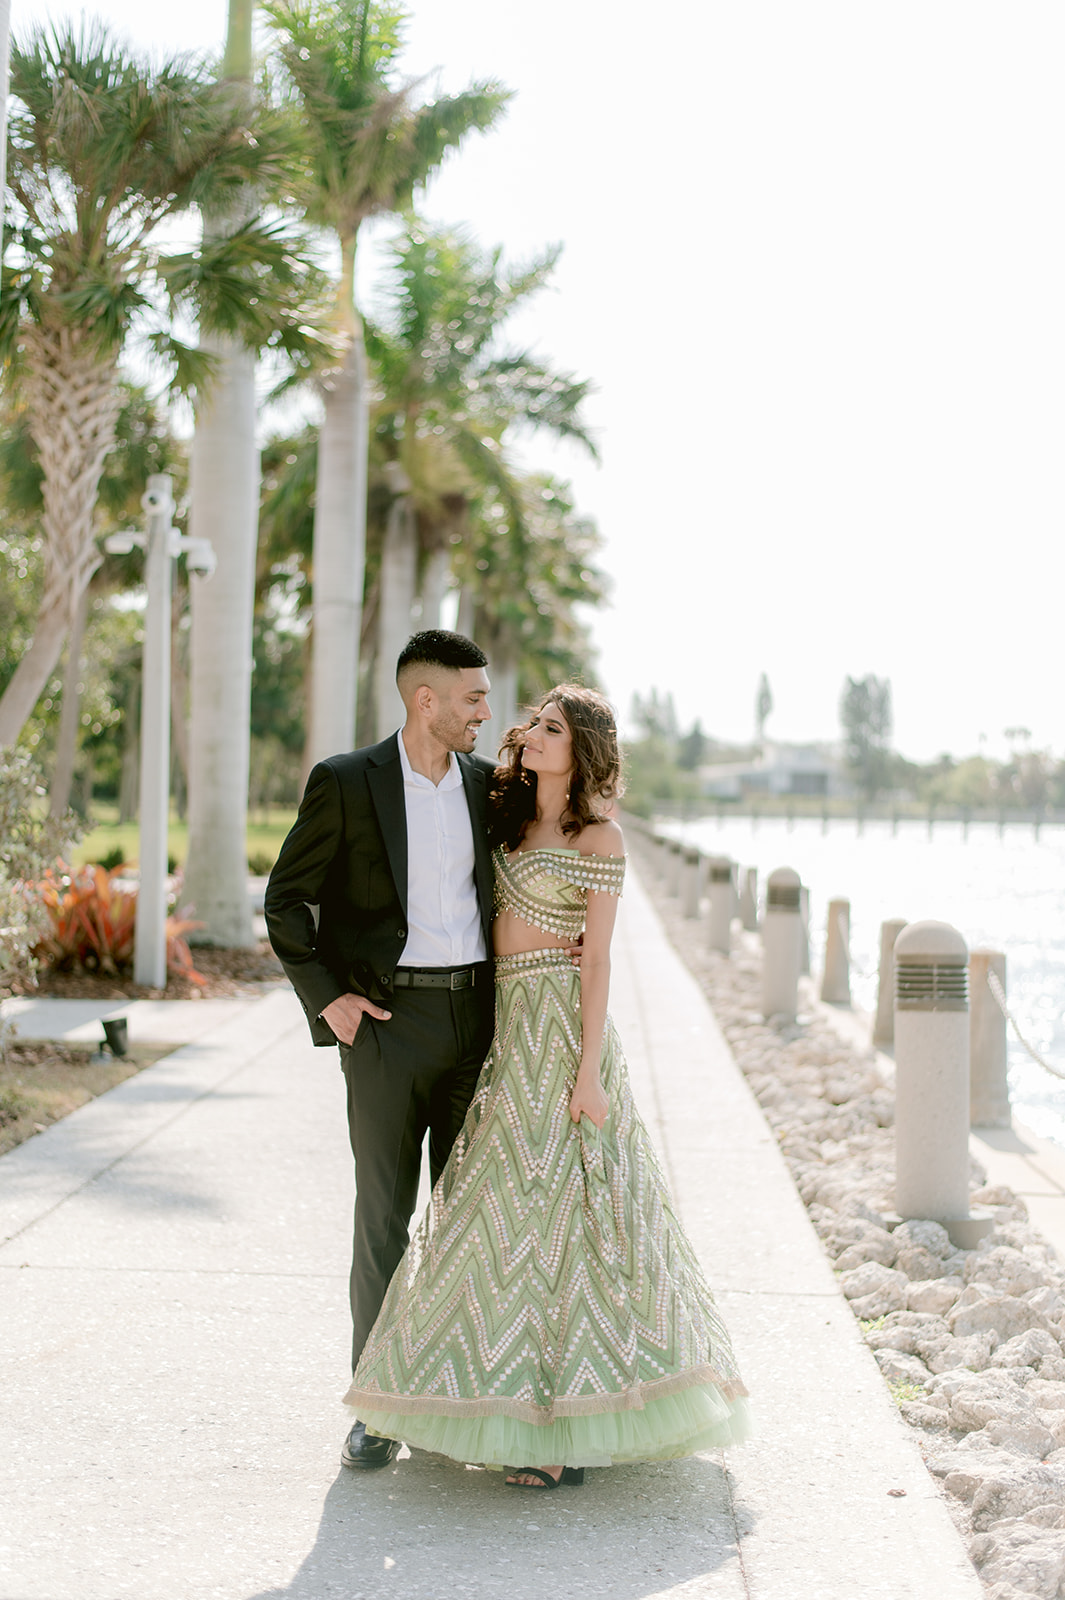 "Elegant and beautiful Ringling Museum engagement session features stunning Indian couple and breathtaking location"
